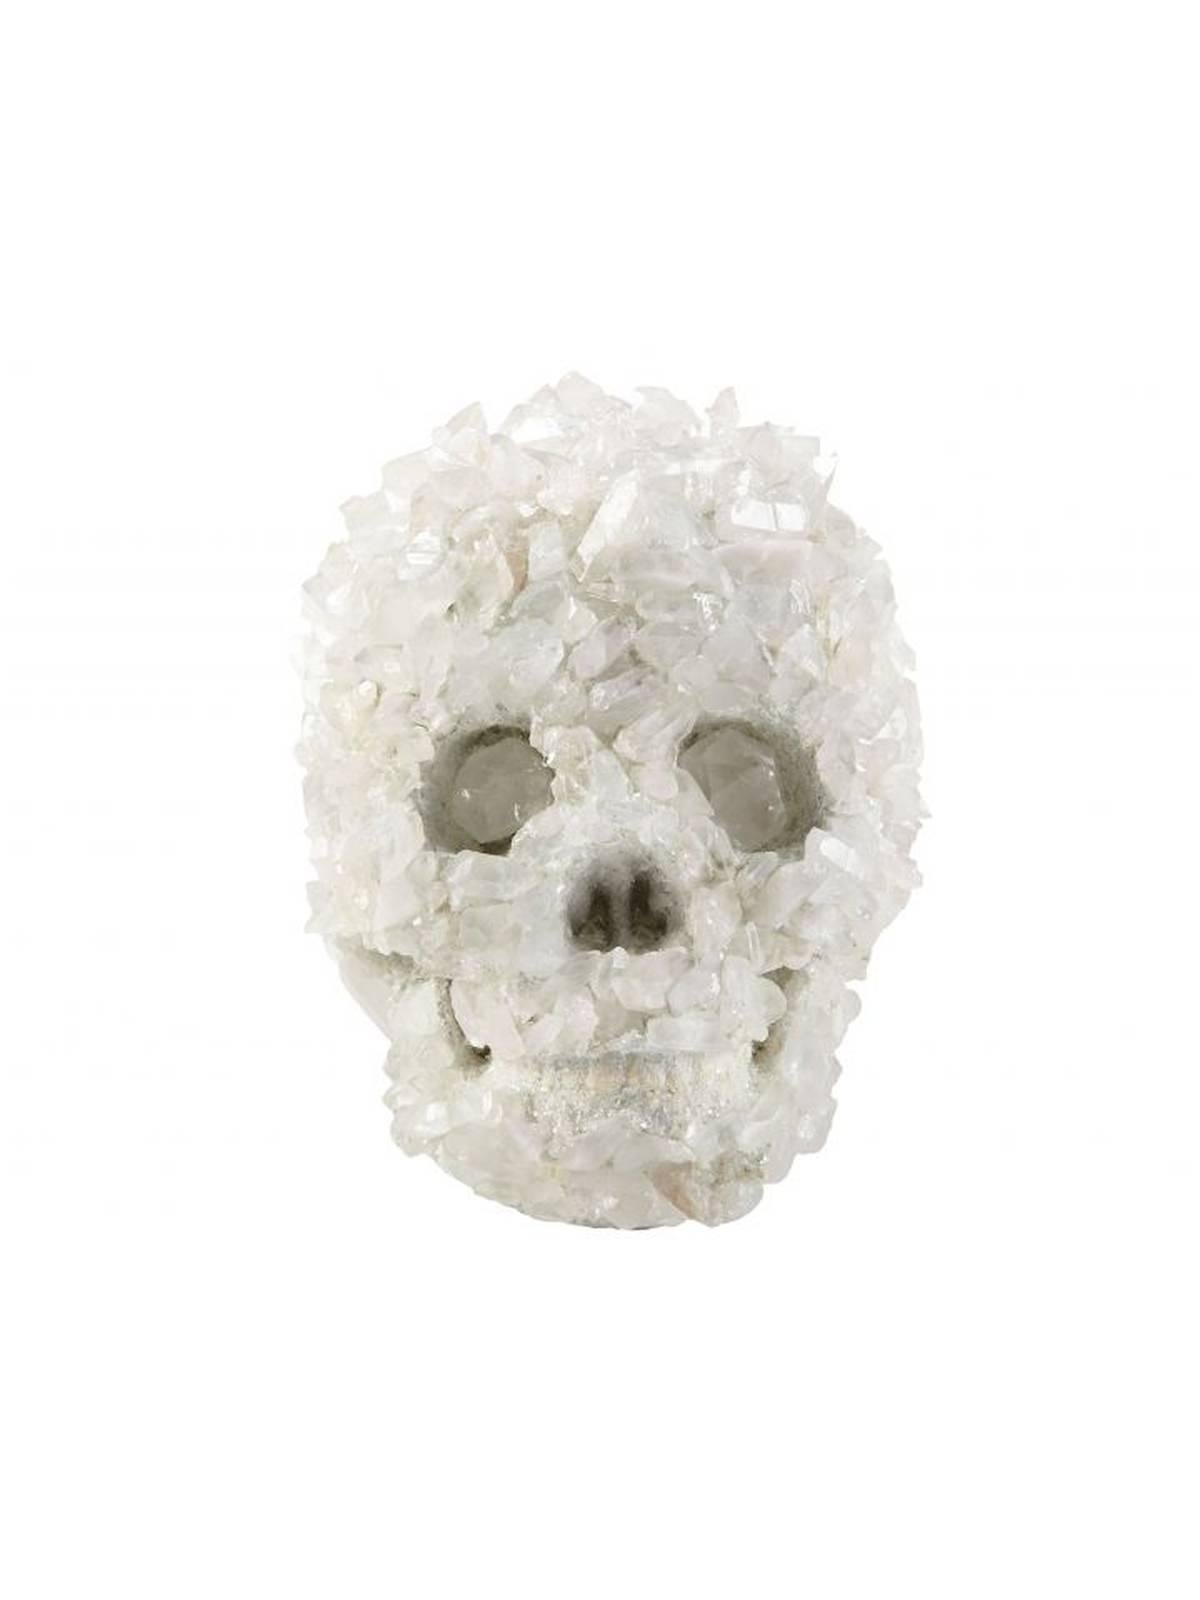 Skull entirely encrusted with intricate quartz from Arkansas. Each piece is carefully created using sculptural techniques. Handmade by artisans in Northern California.
 